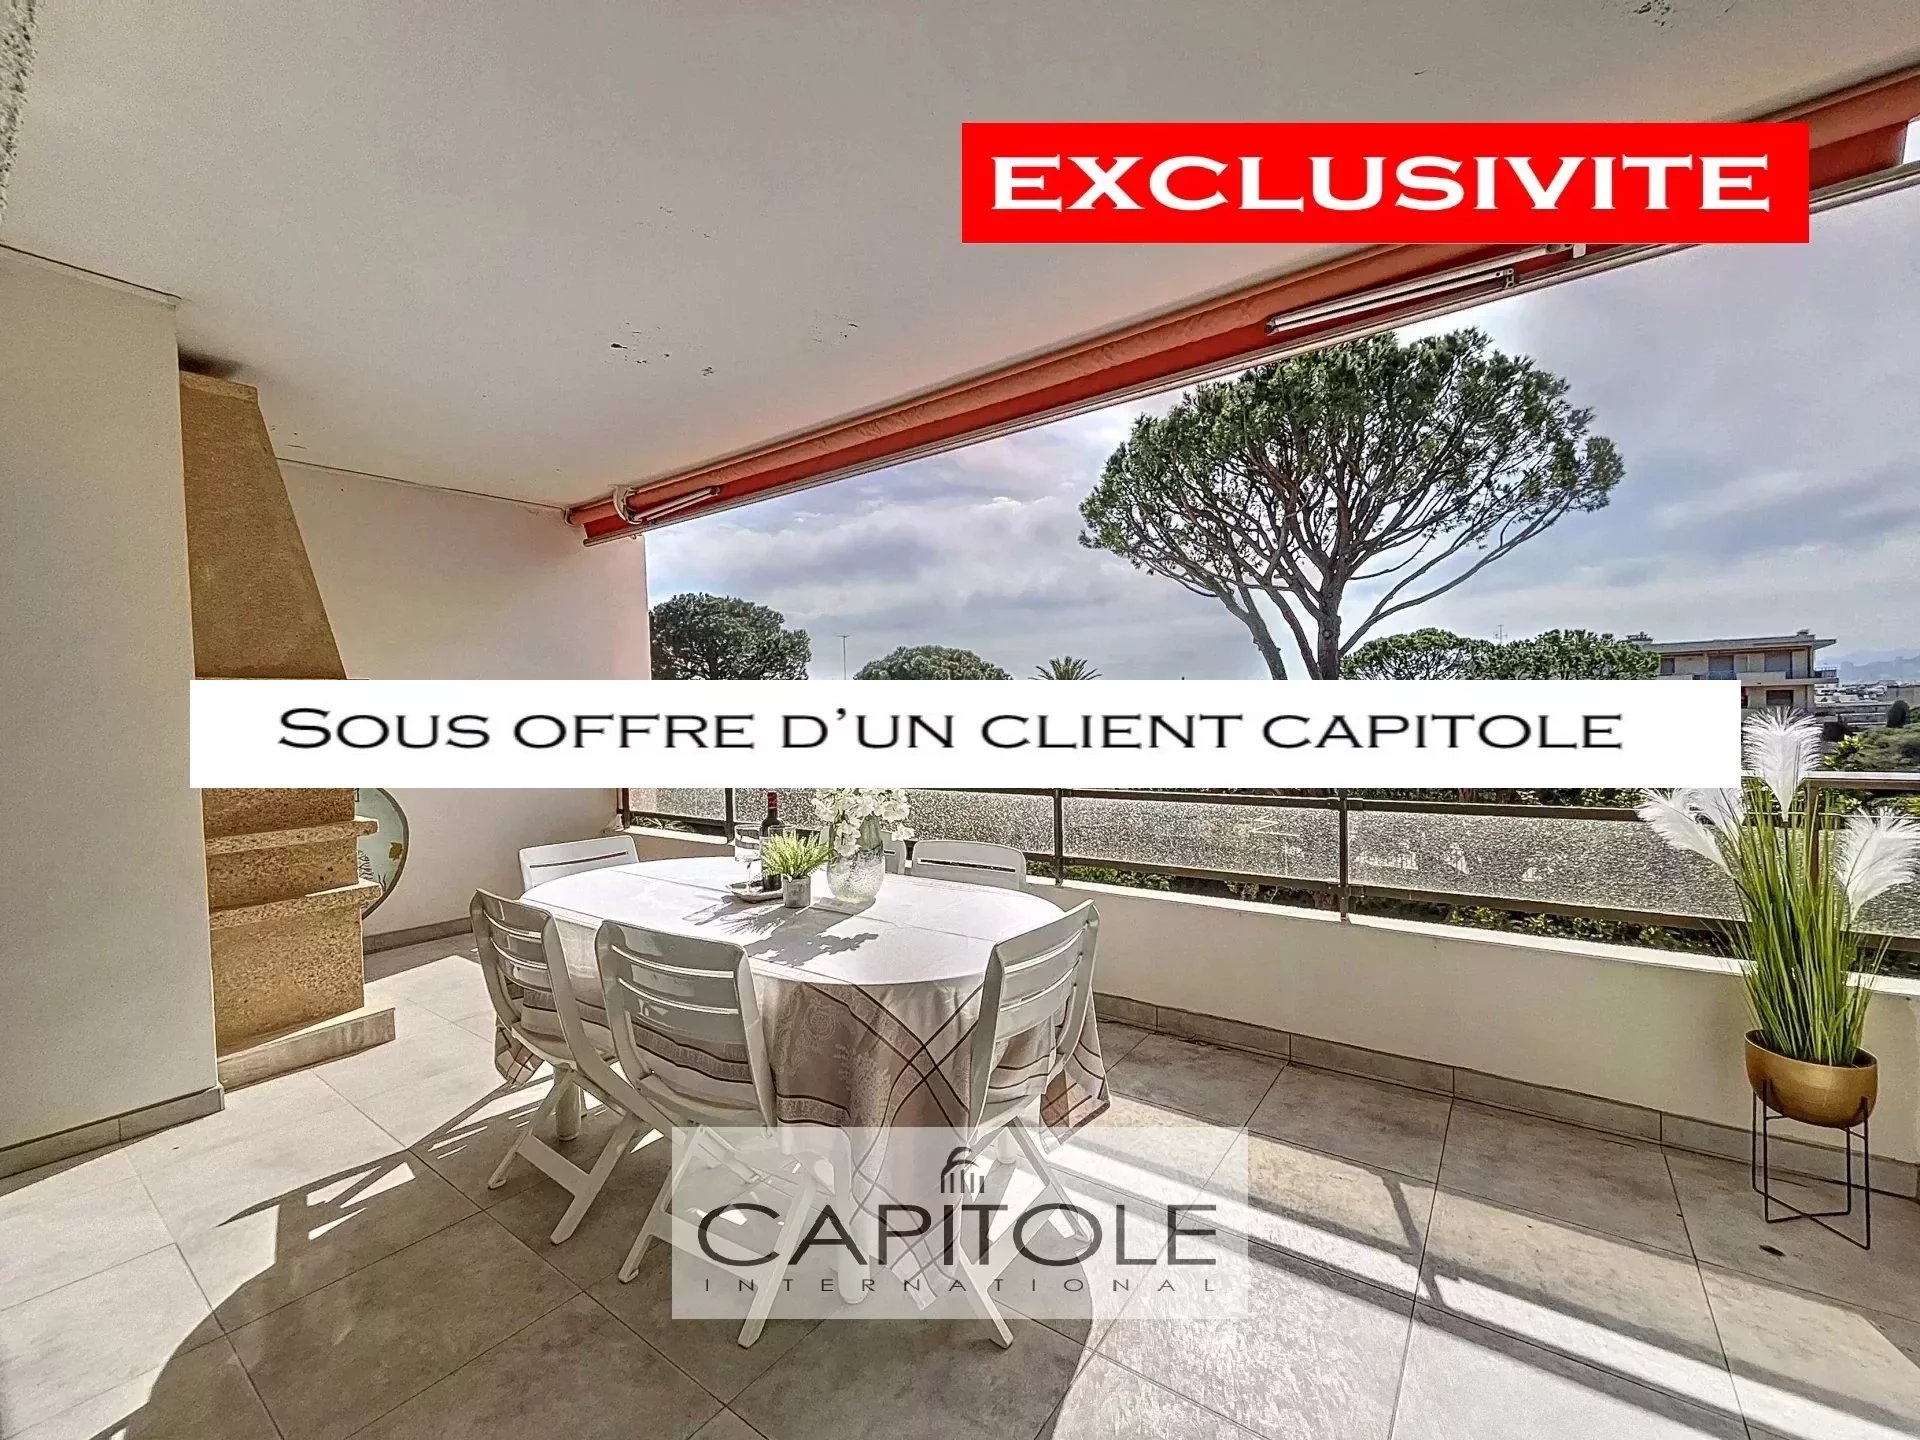 SOLE AGENT PROPERTY - ANTIBES -  For sale 2-bedroom apartment, terrace of 20 sqm, swimming pool, cellar, garage